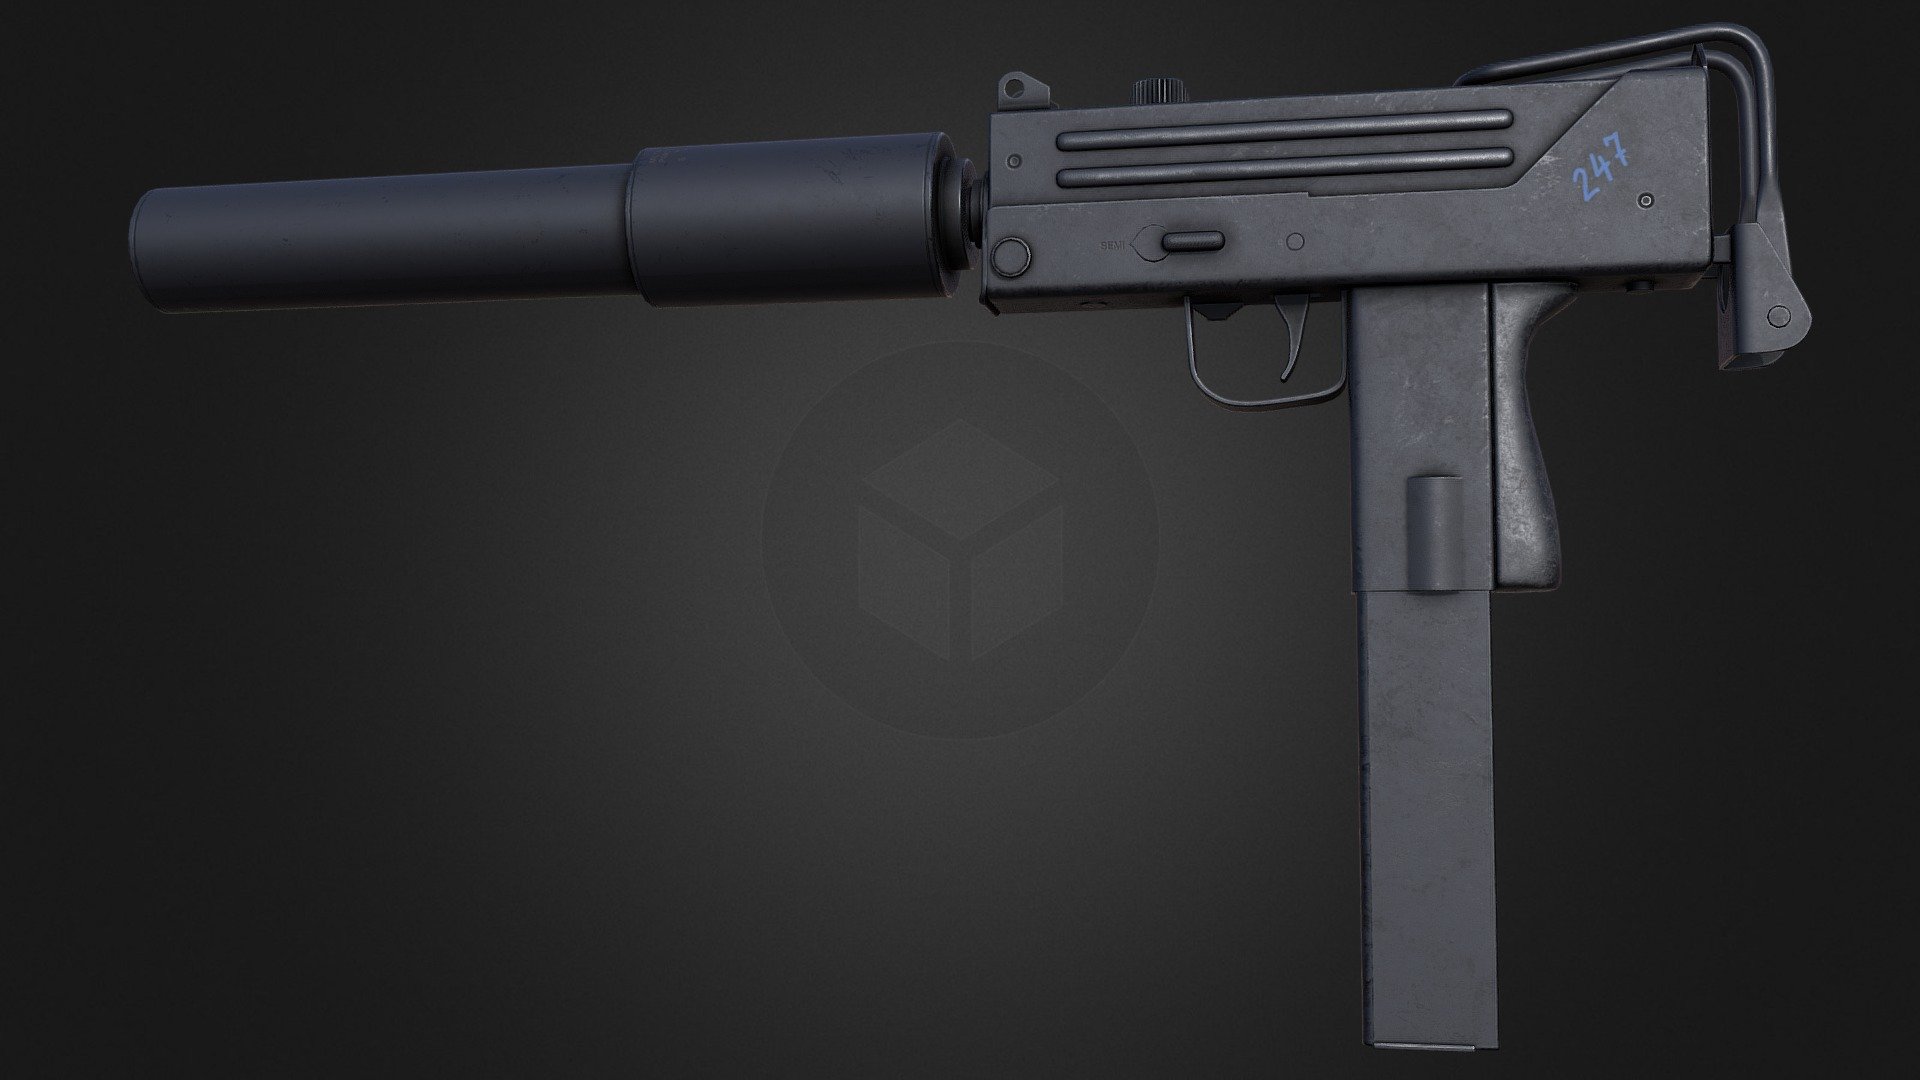 Low-poly model of the well-known Ingram MAC-10 submachine gun. Textures are: 4k for receiver, 2k for mag, stock and suppressor, and 512x512 for fire mode selector. Textures are PBR metallic-roughness in PNG format. Normals are in DirectX format (-Y). Overall triangle count is 11968 tris, 6232 verts.

All model parts that intended to be moving when animated were baked separately. Suppressor is detachable 3d model